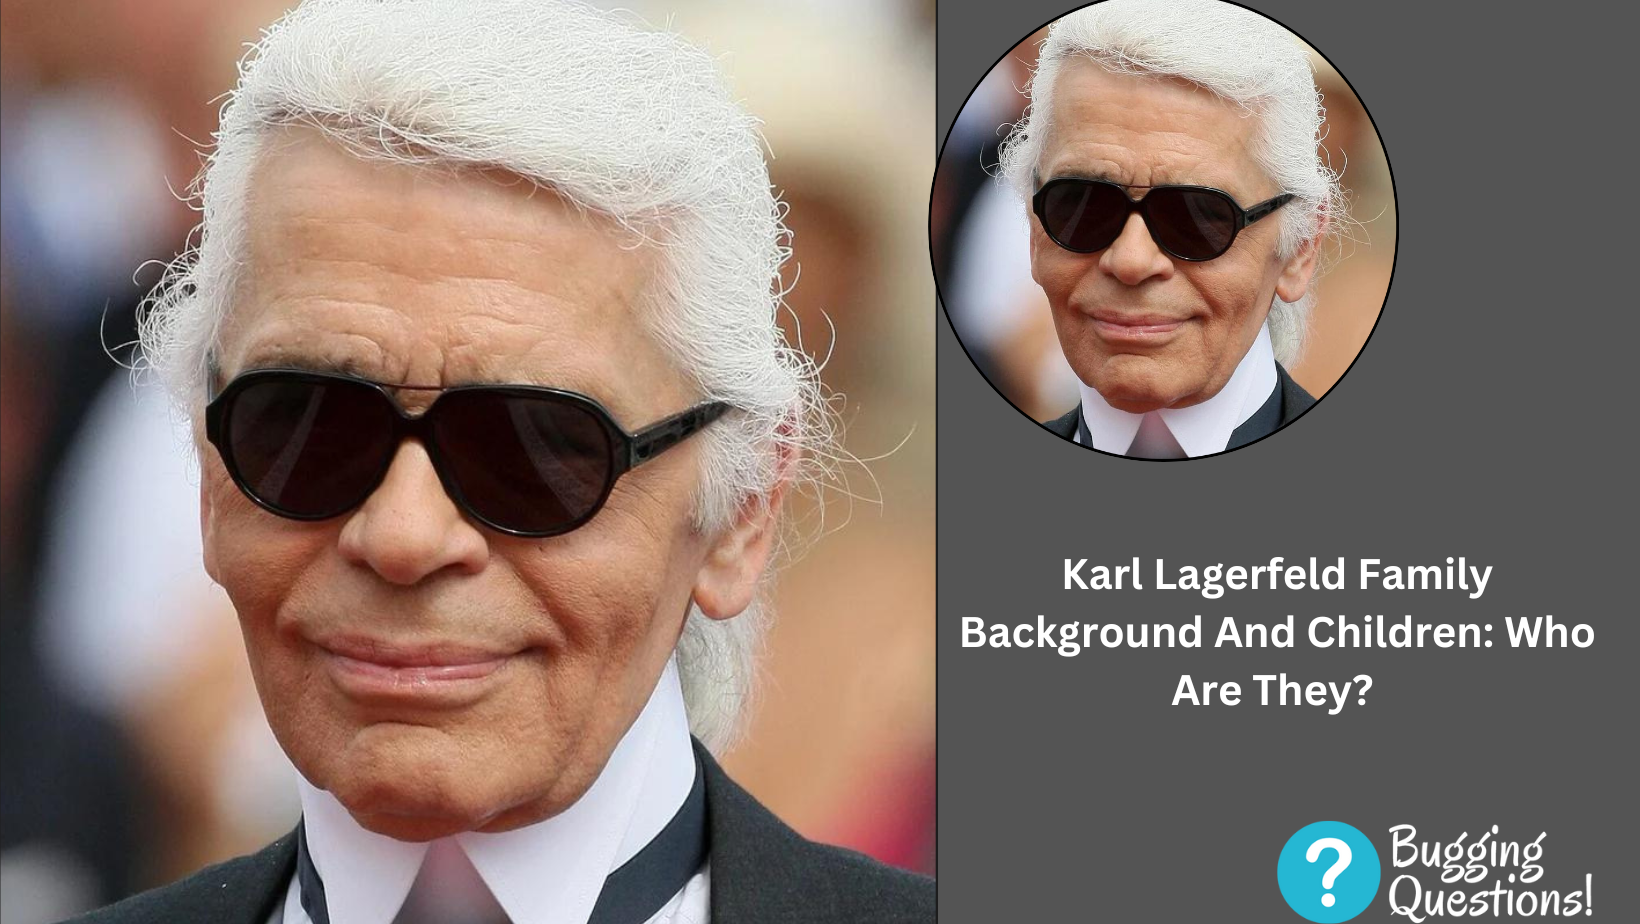 Karl Lagerfeld Family Background And Children